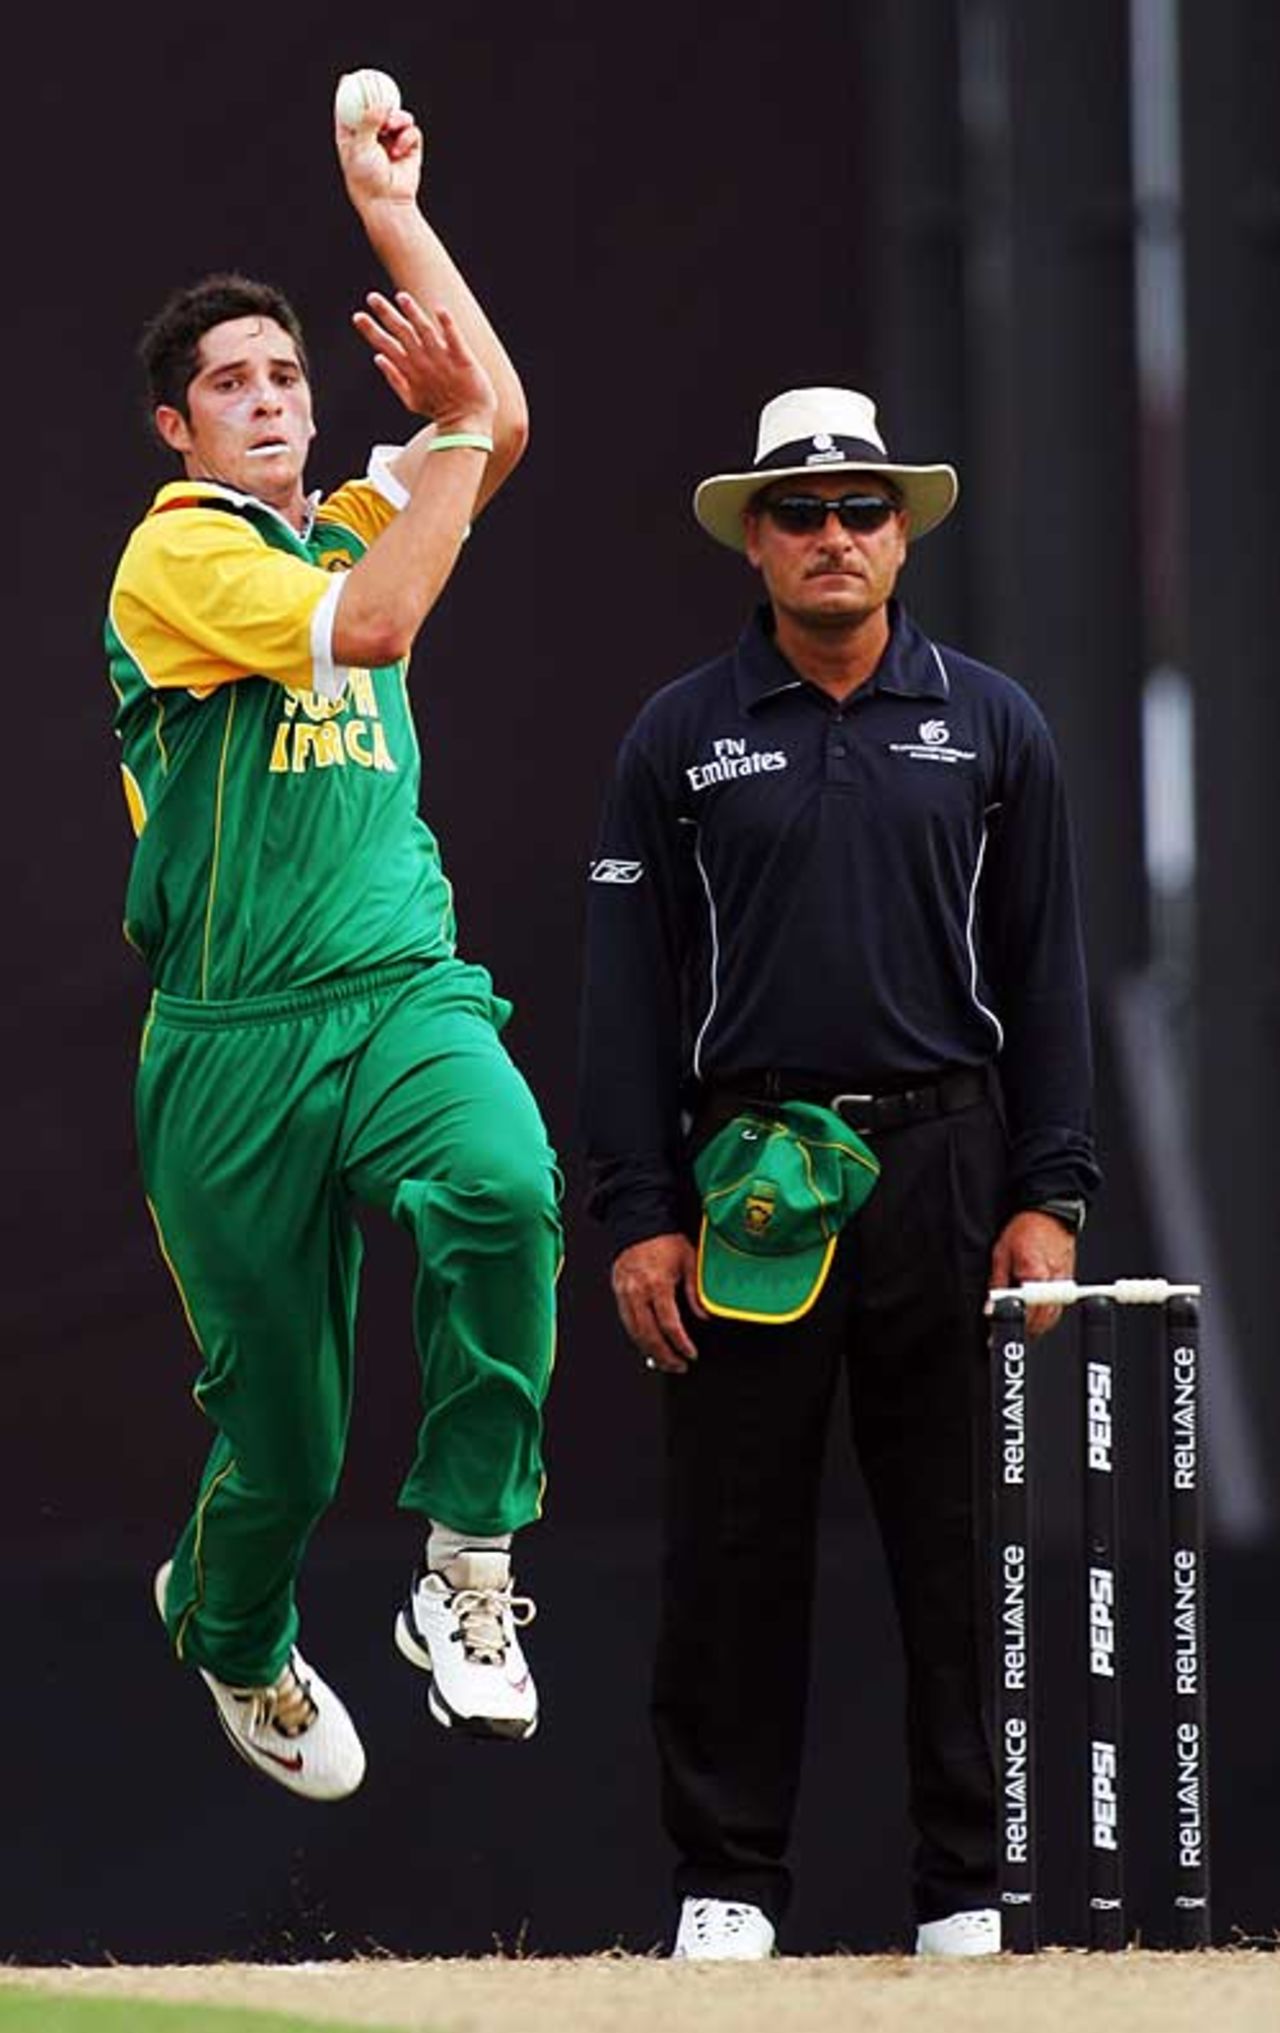 Wayne Parnell took 3 for 37 against West Indies Under-19s, Group B: South Africa Under-19s v West Indies Under-19s, ICC Under-19 World Cup, Kuala Lumpur, February 18, 2008